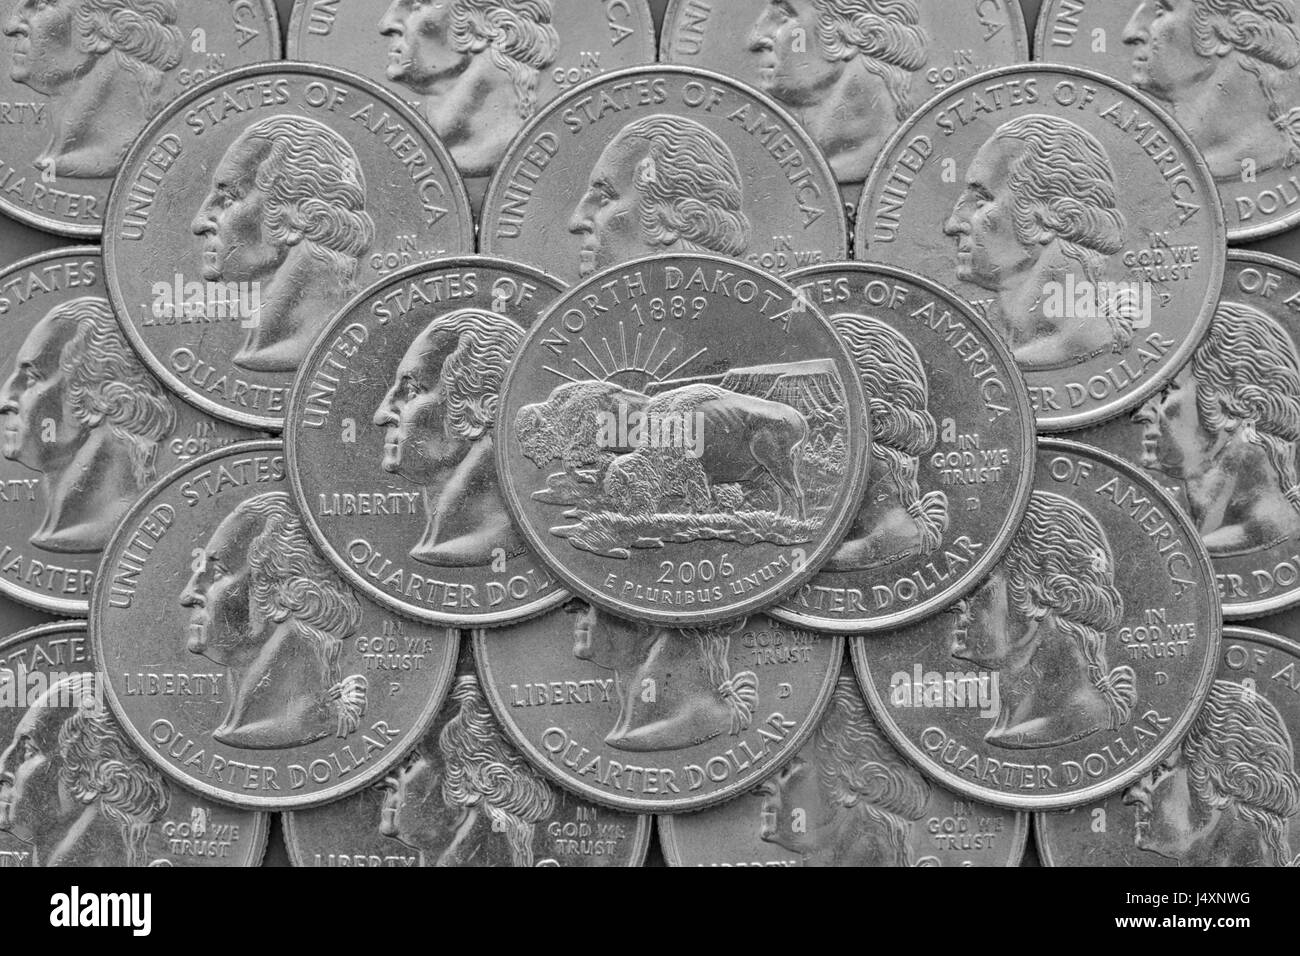 North Dakota State and coins of USA. Pile of the US quarter coins with George Washington and on the top a quarter of North Dakota State. Stock Photo